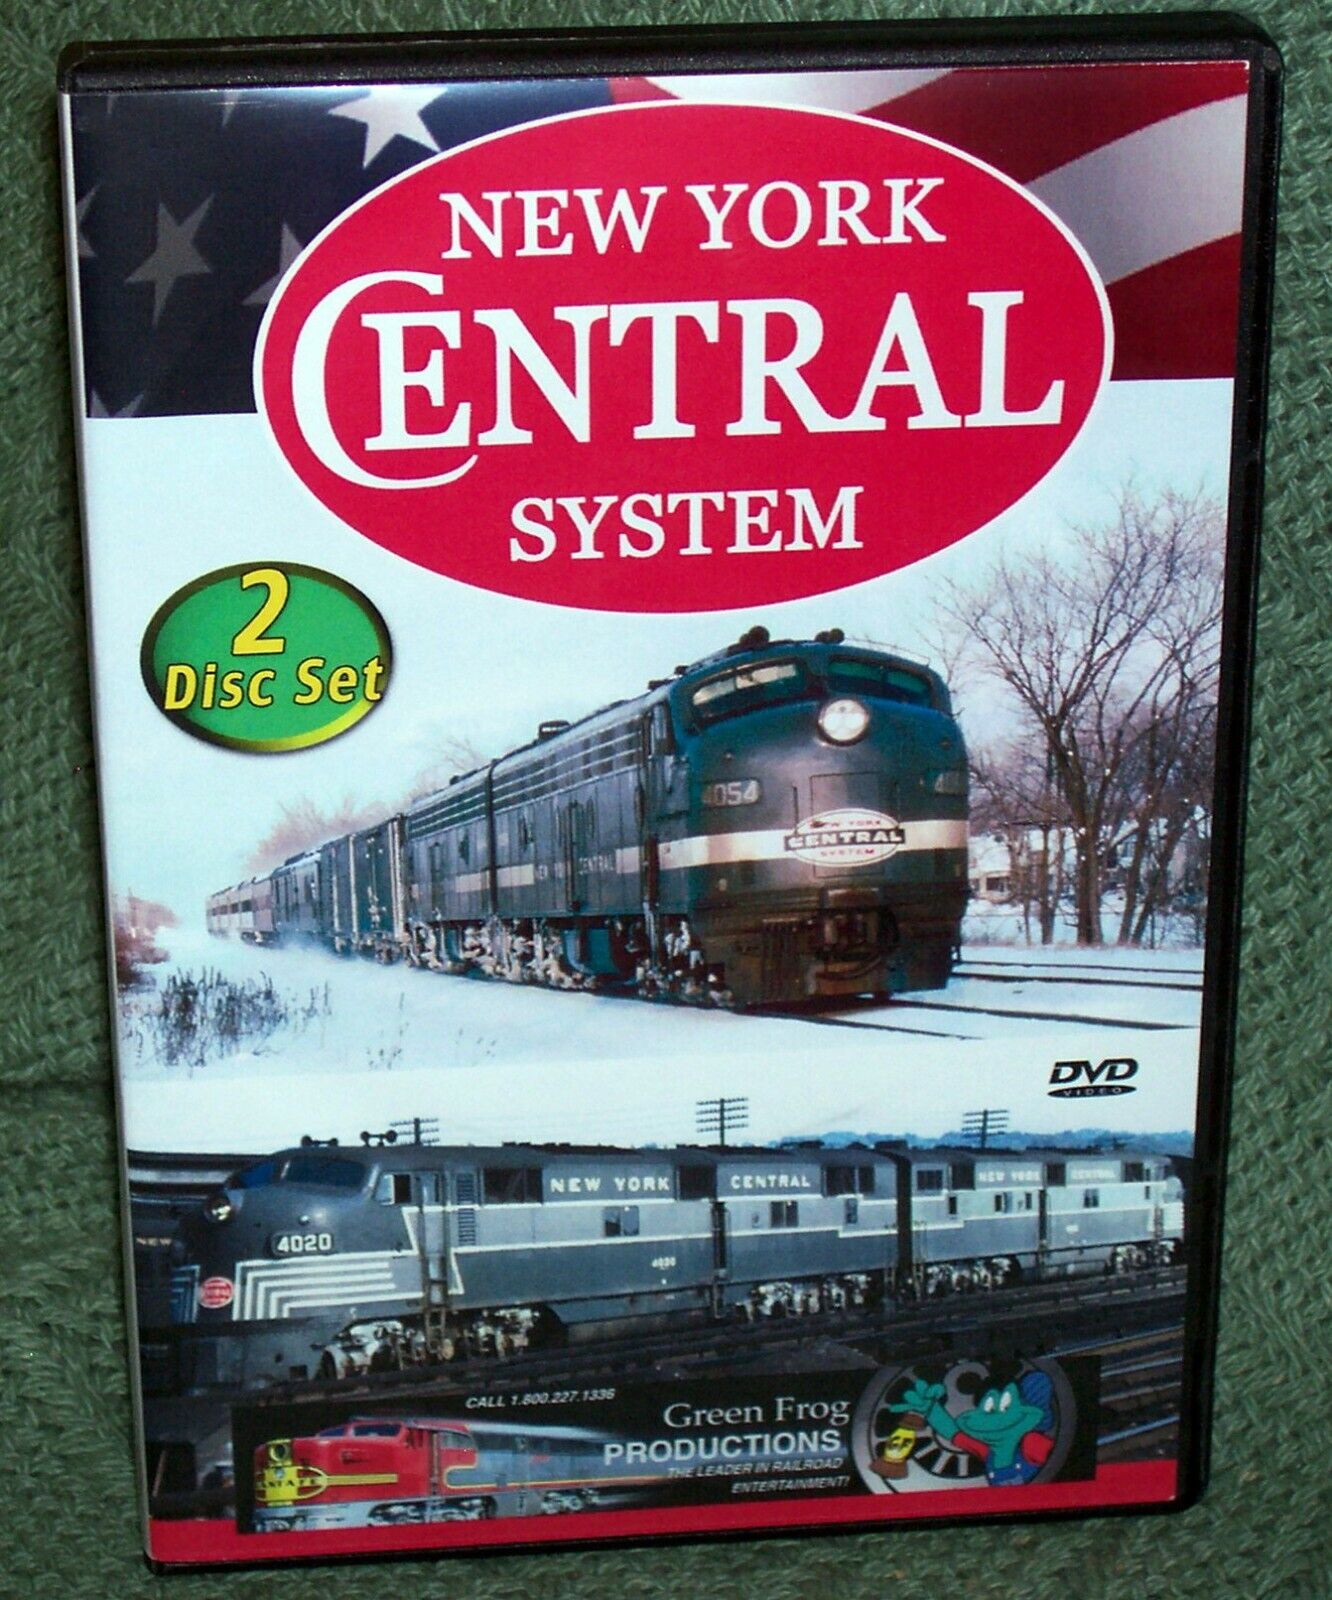 DVD NEW YORK CENTRAL SYSTEM  SPECIAL 2-DISC 4 PROGRAM  COLLECTION